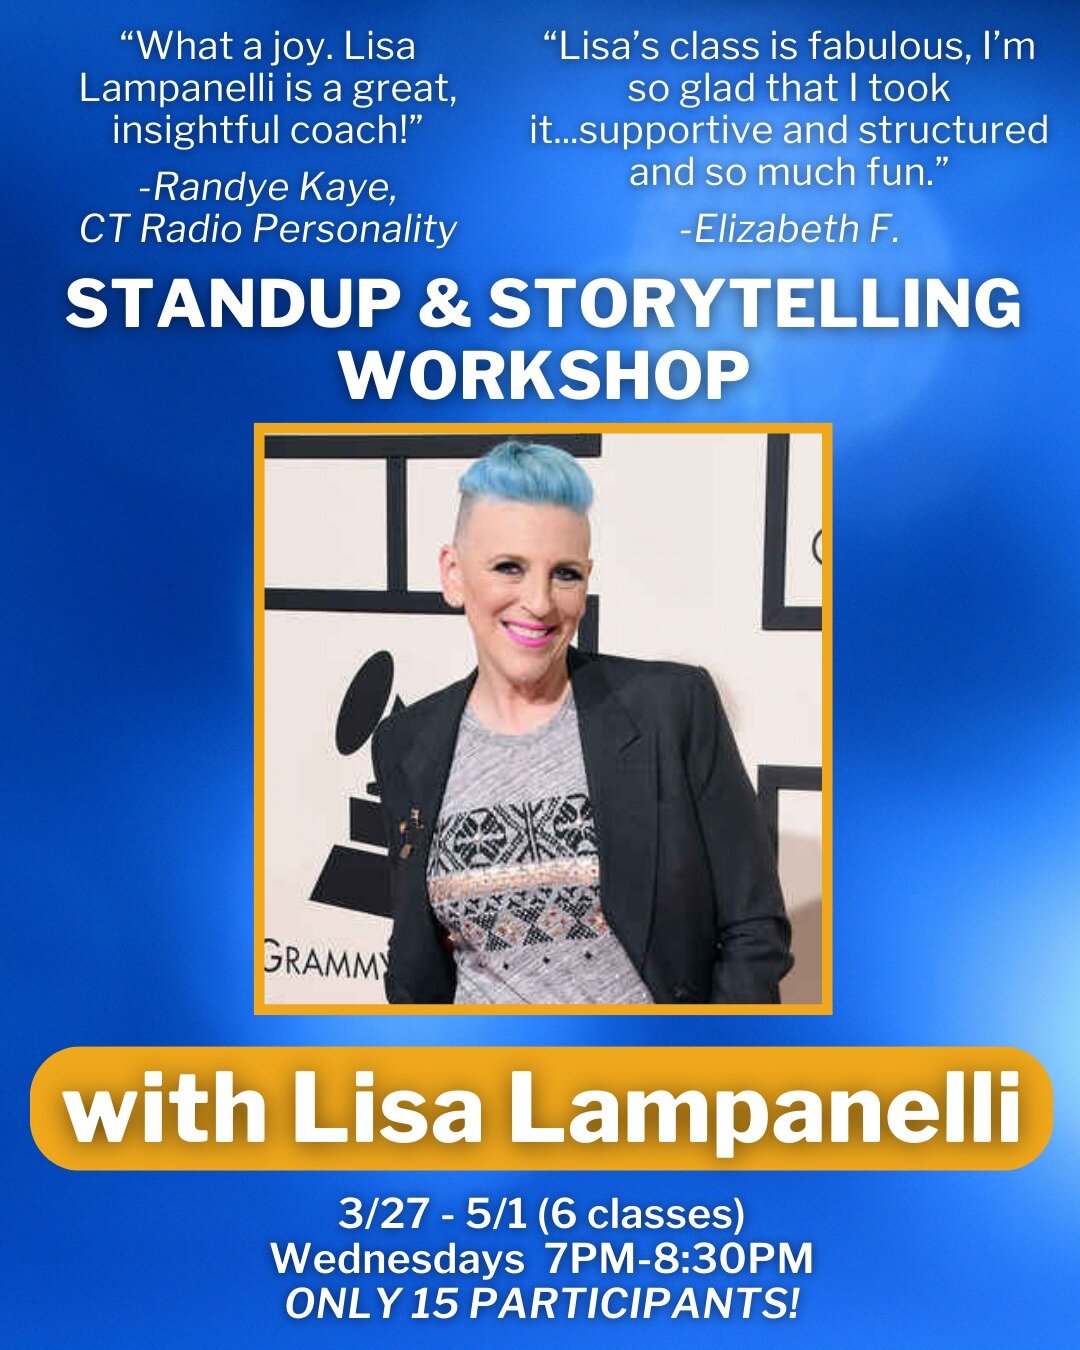 ⭐ONLY 5 SPOTS LEFT FOR OUR COMEDY WORKSHOP WITH LISA LAMPANELLI!⭐

Don't miss your chance to learn from a comedy icon this spring in a class for ALL LEVELS of students &ndash; from beginners to advanced! Grammy-nominated comedian Lisa Lampanelli is h